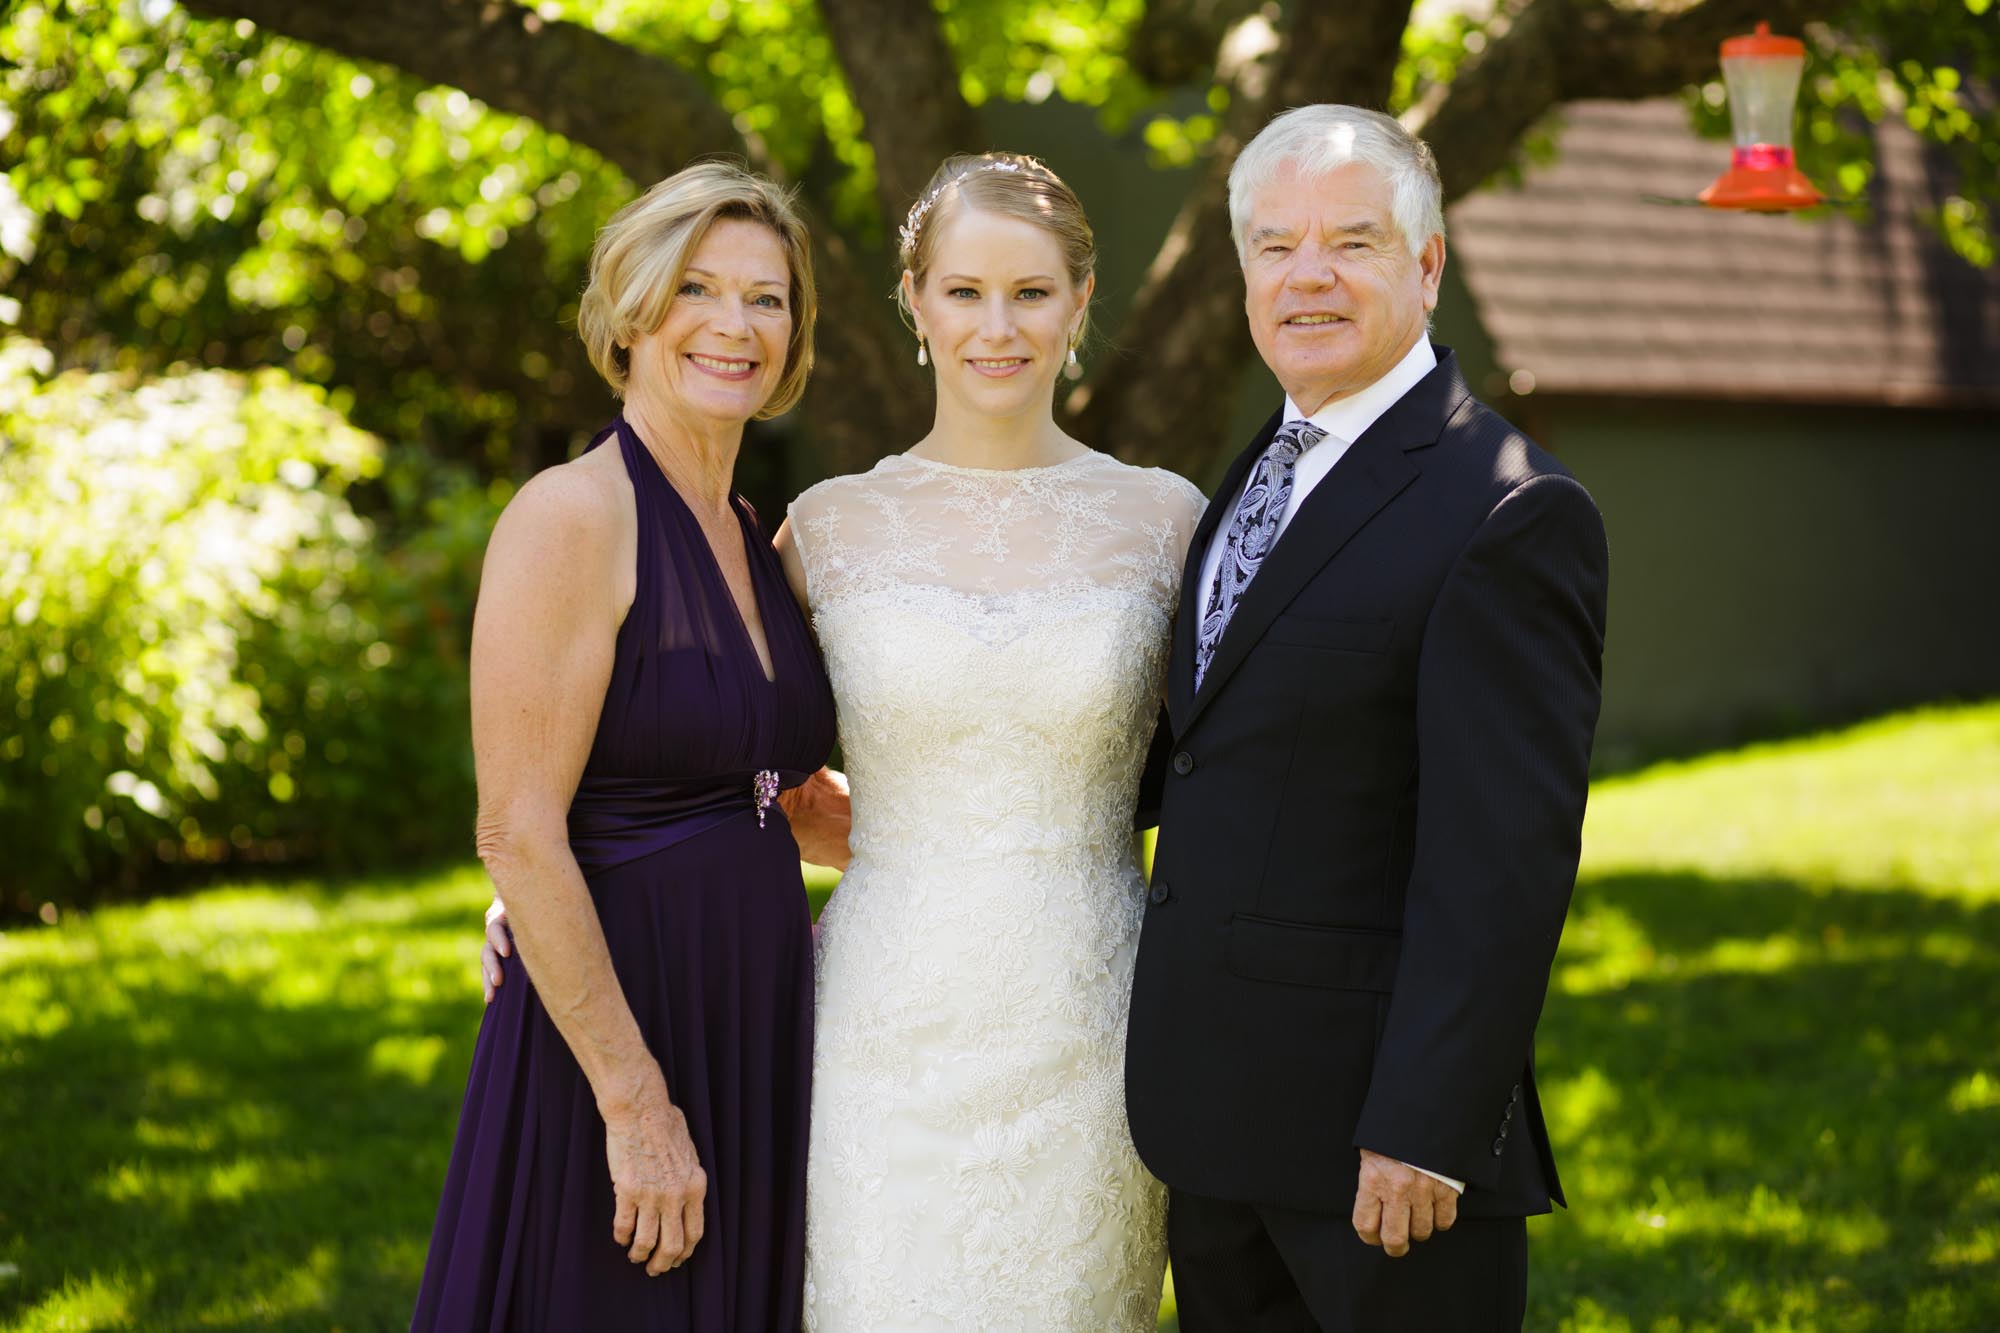 Amie, Mom and Dad